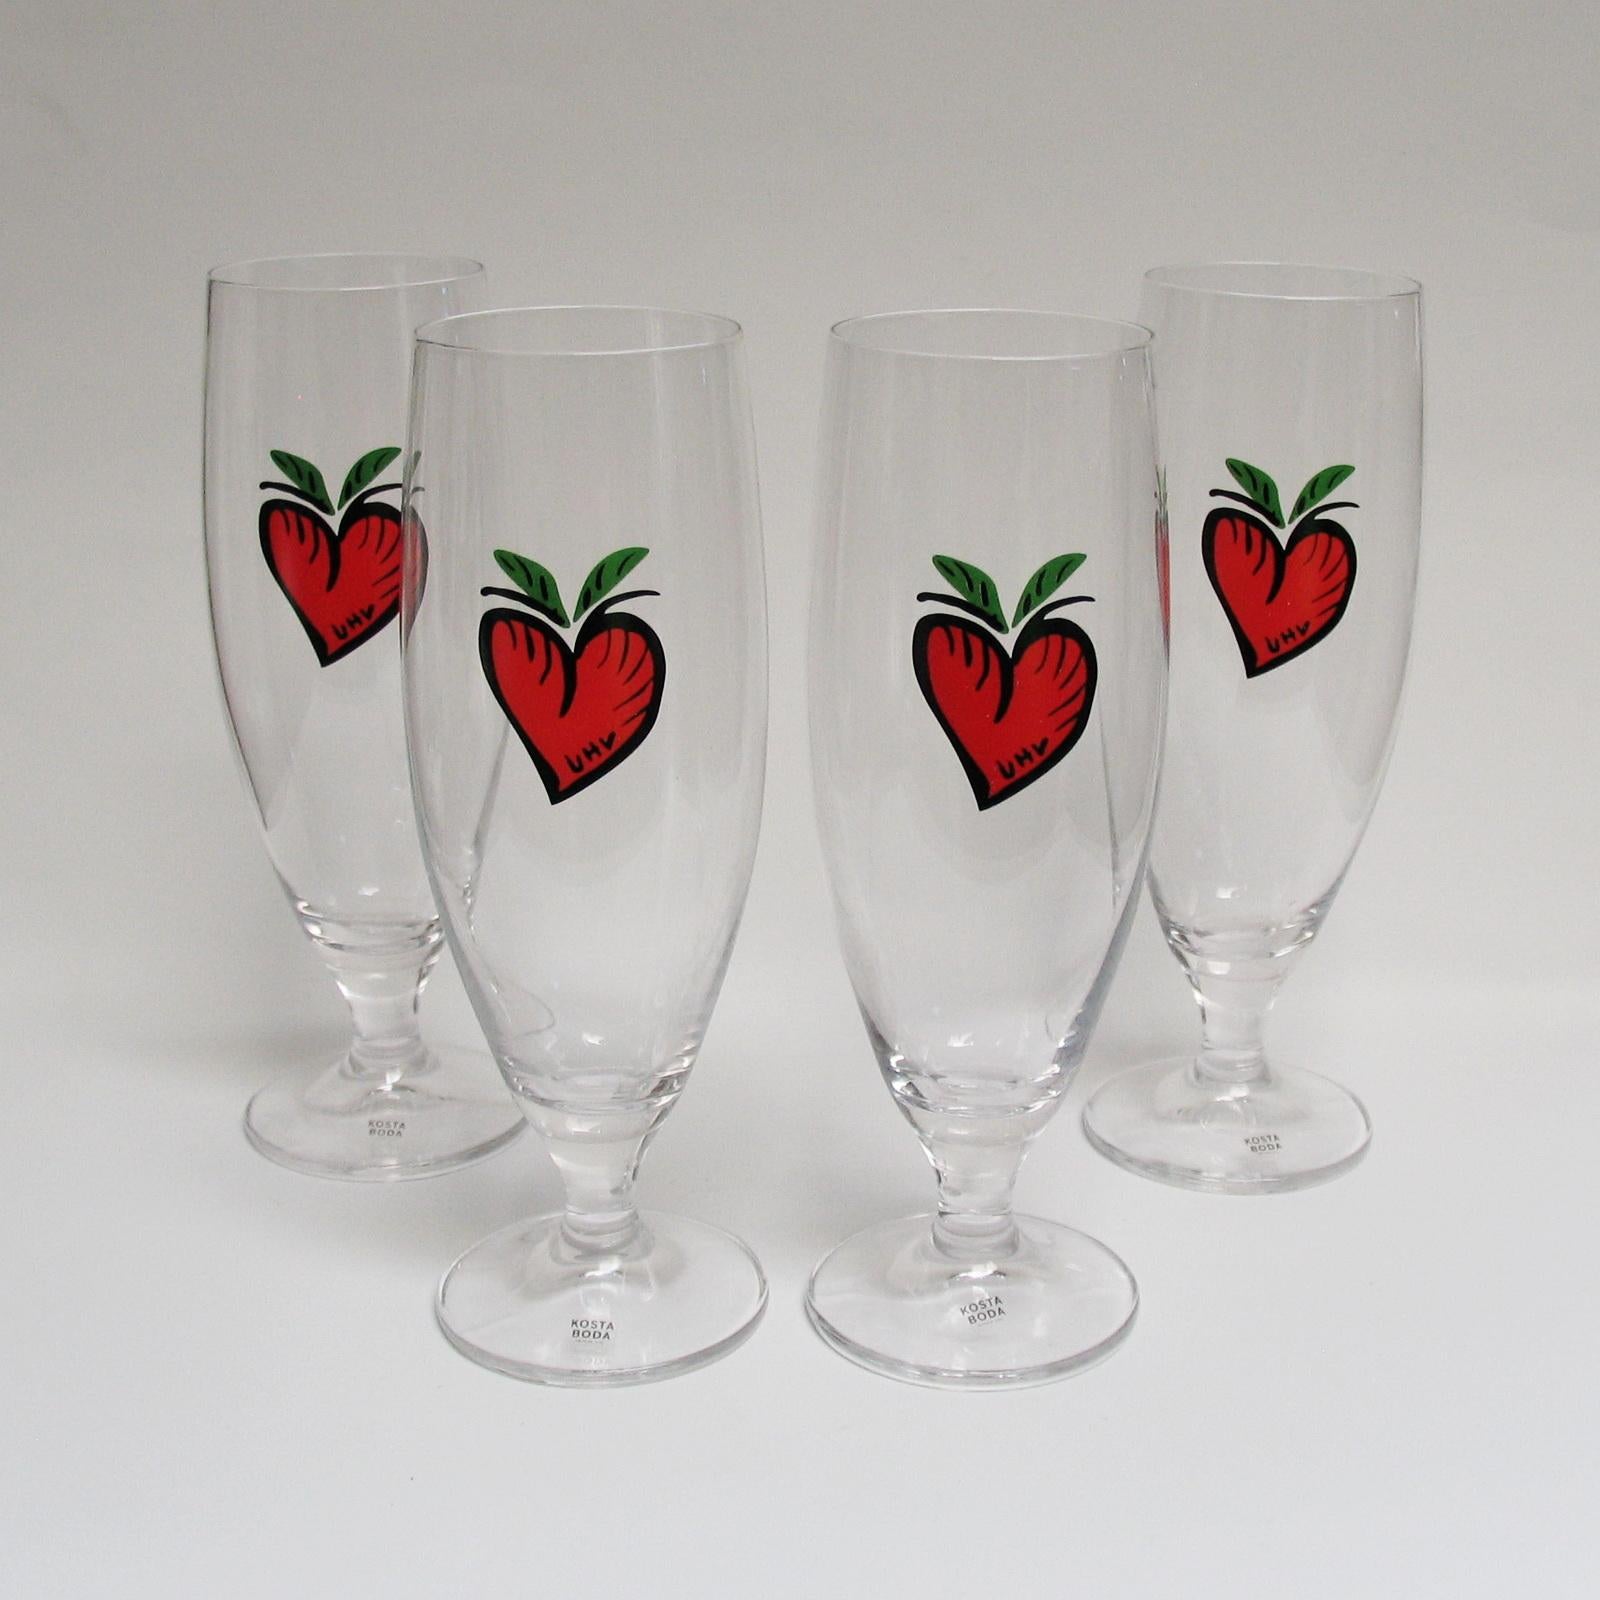 Ulrica Hydmann Vallien Kosta Boda set of four beer glasses, hand painted, artist signature, all in excellent condition.
Dimensions:
Volume 50 cl, height 215 mm, diameter 73 mm.